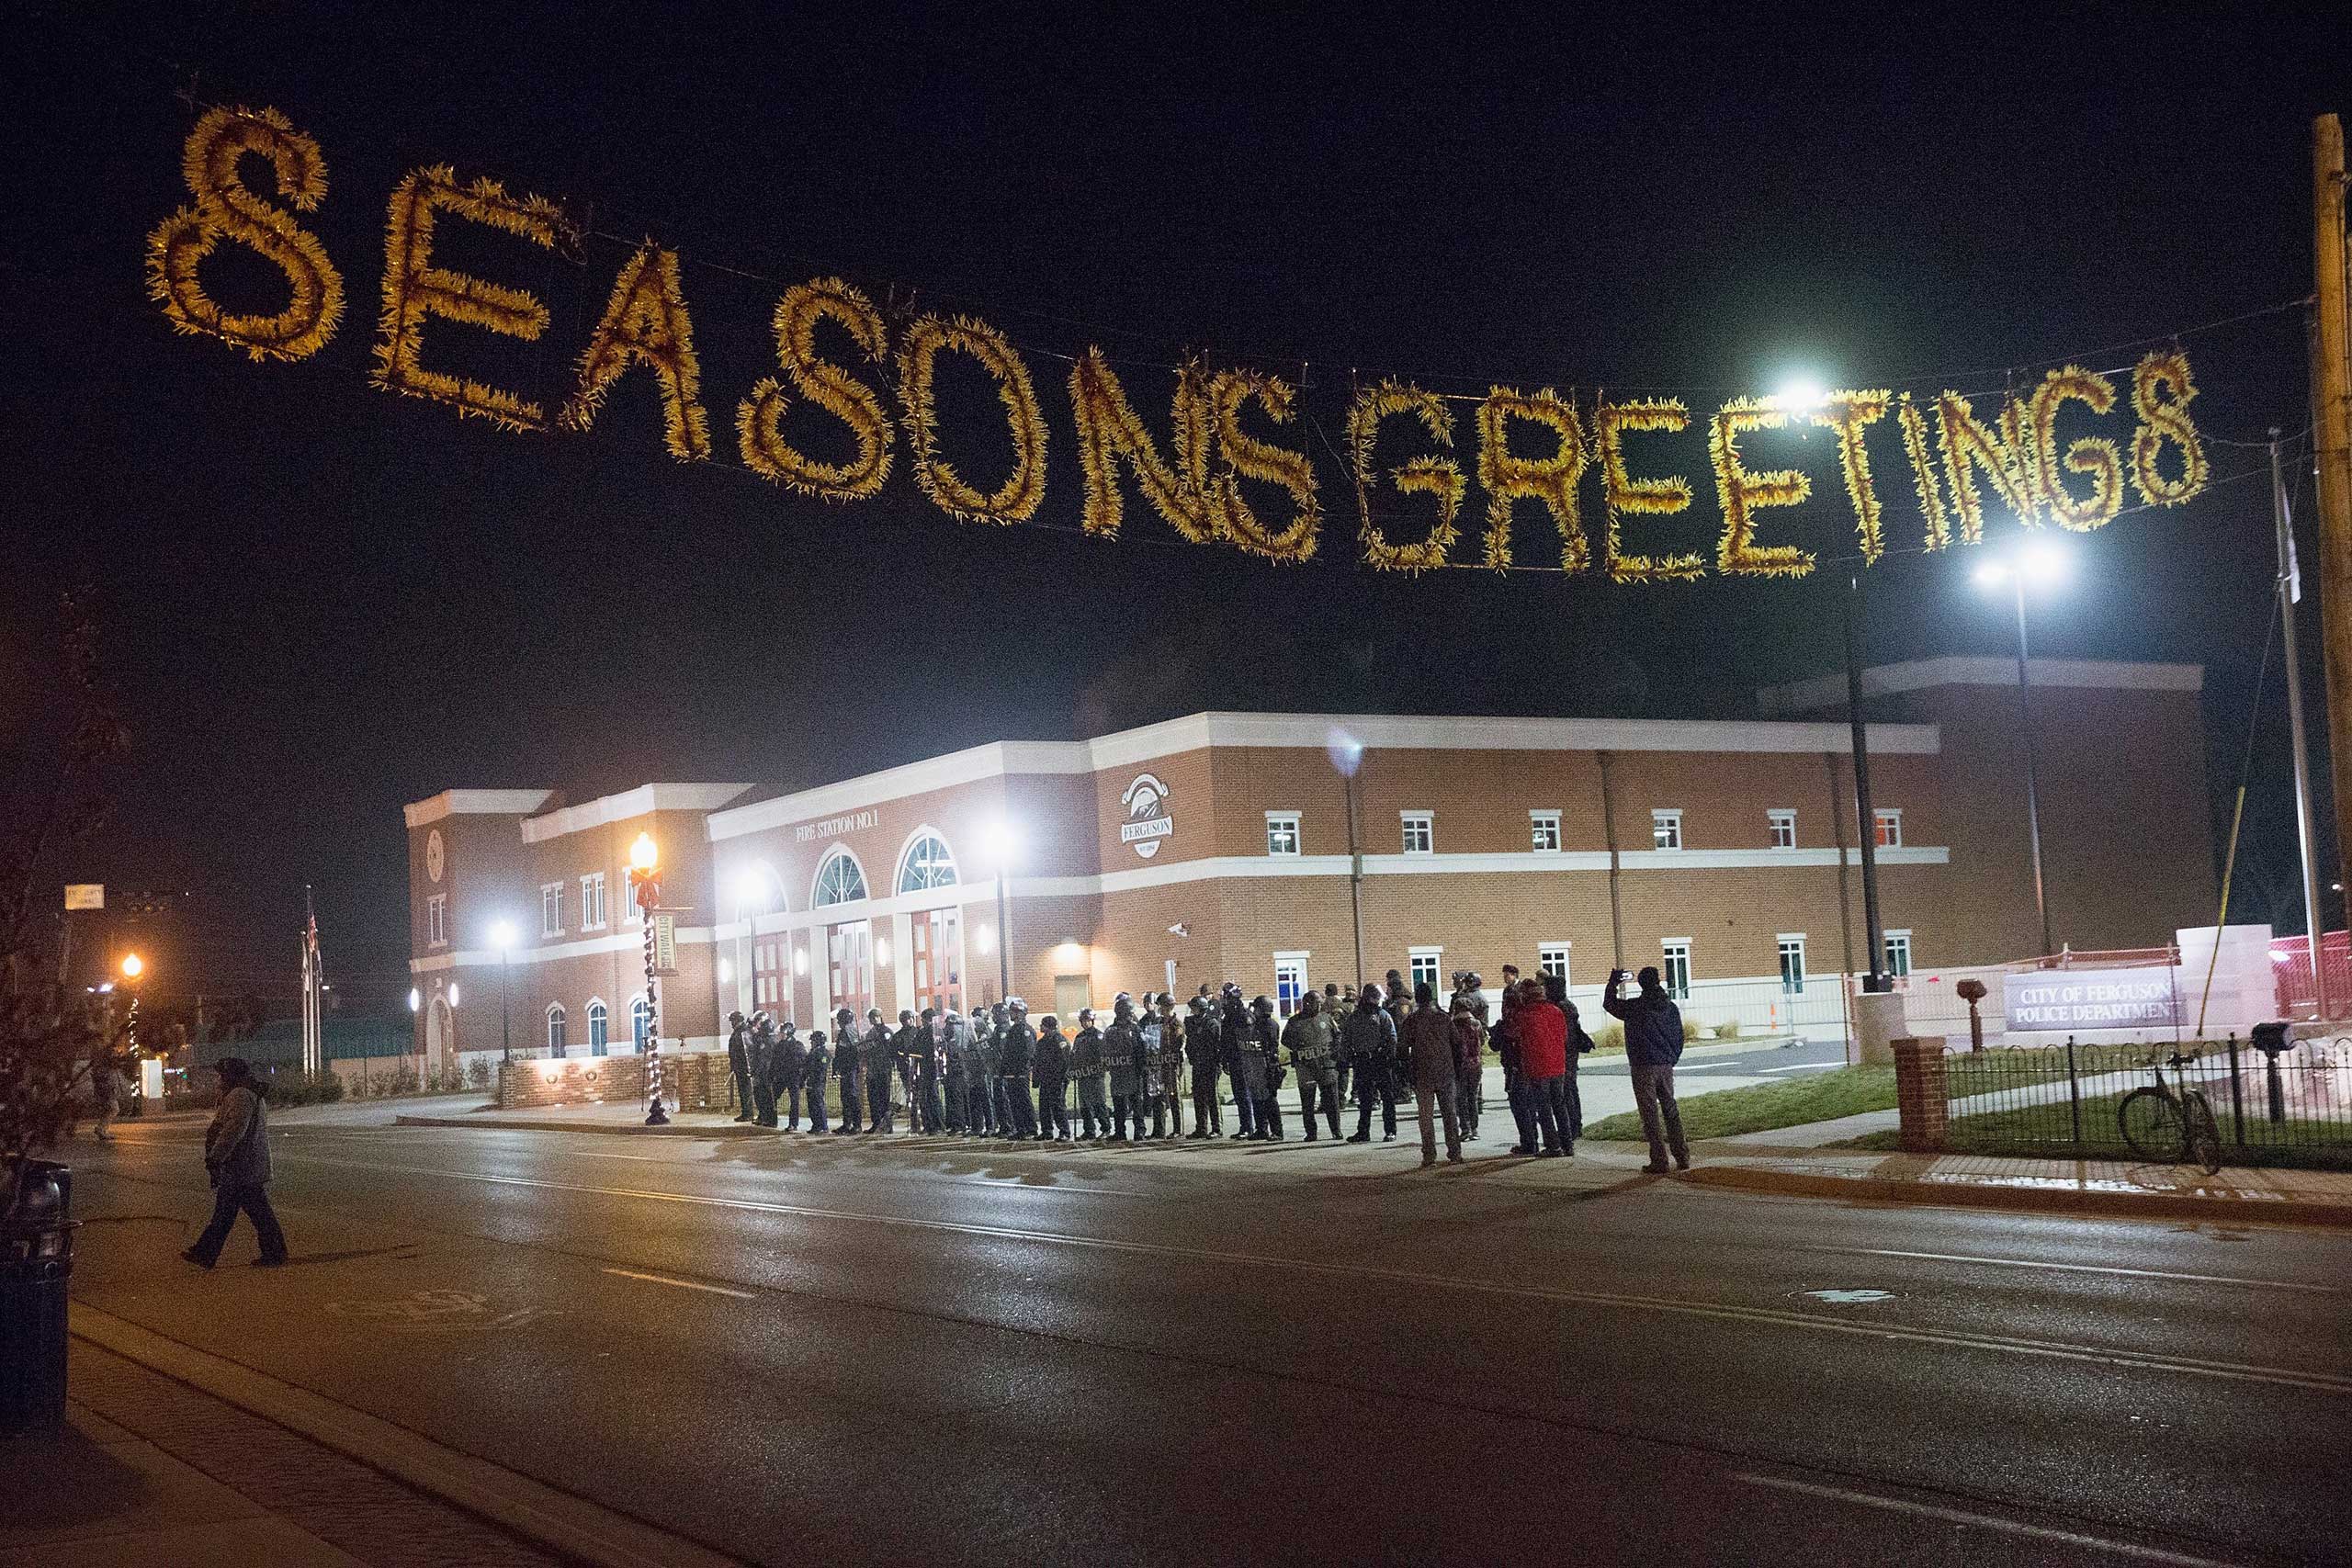 Police guard the Ferguson police station as demonstrators protest the shooting death of Michael Brown in Ferguson, Mo. on Nov. 20, 2014